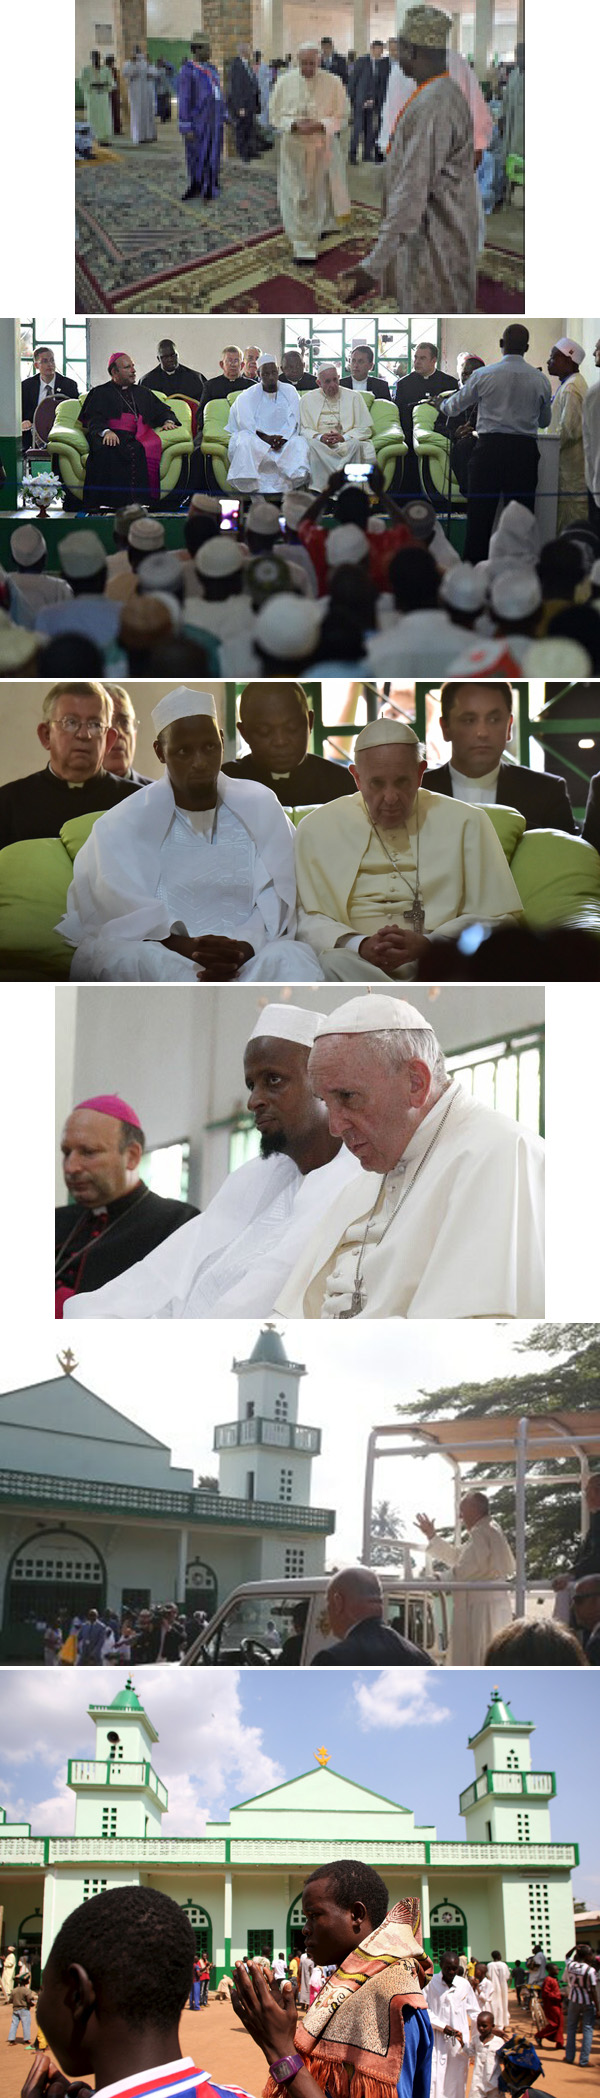 Pope Francis at the Mosque of Bangui 2